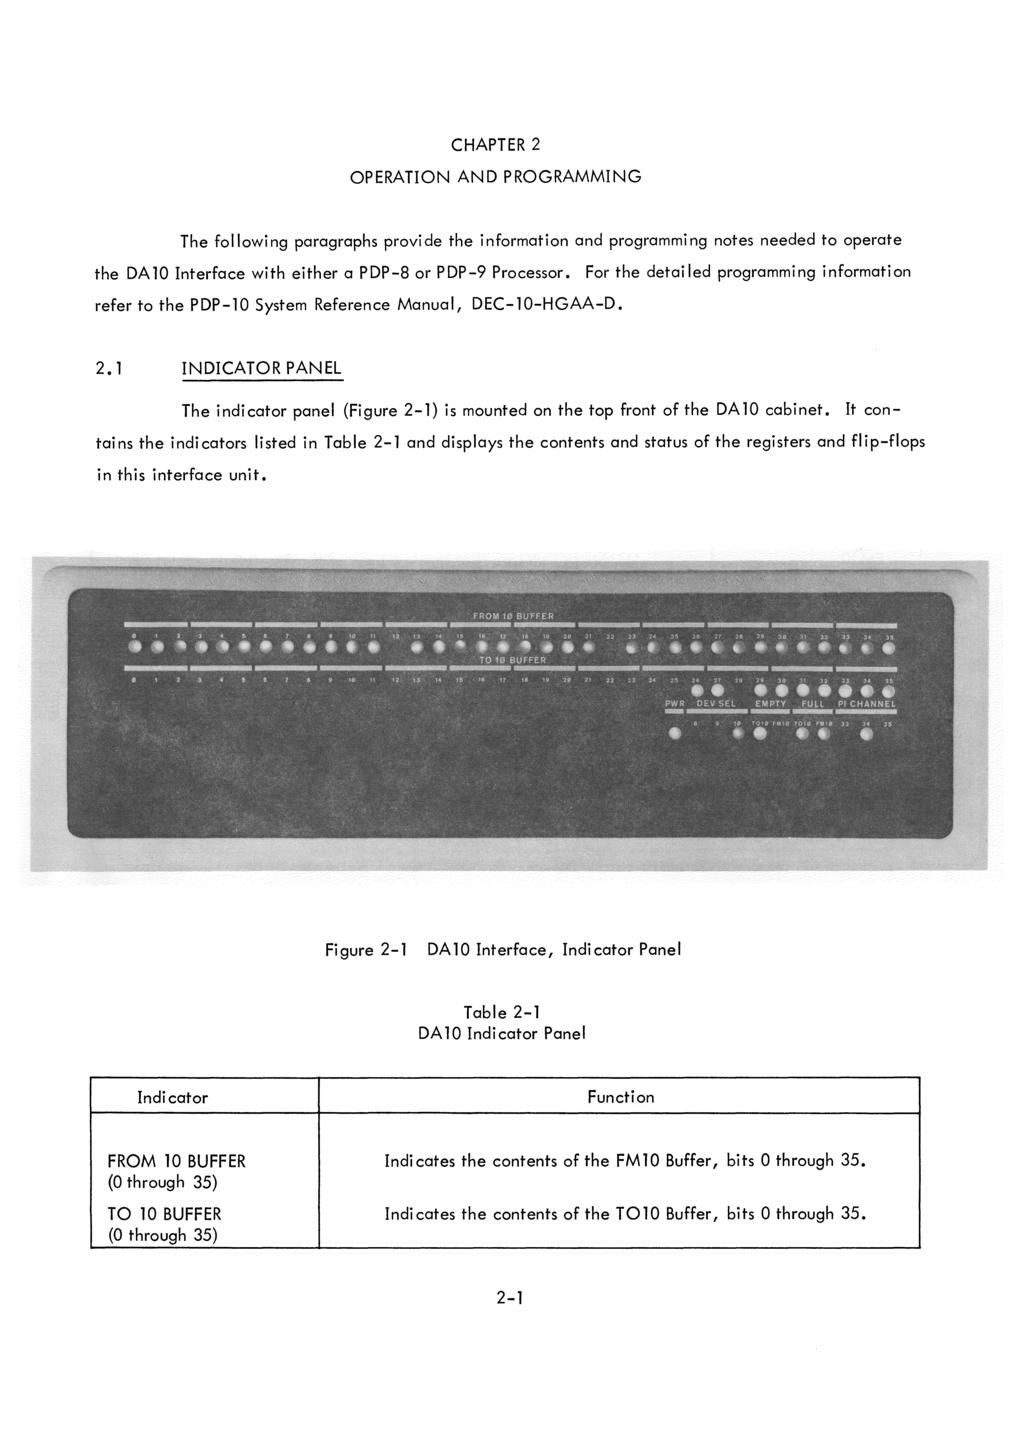 CHAPTER 2 OPERATON AND PROGRAMMNG The following paragraphs provide the information and programming notes needed to operate the DA10 nterface with either a PDP-8 or PDP-9 Processor.